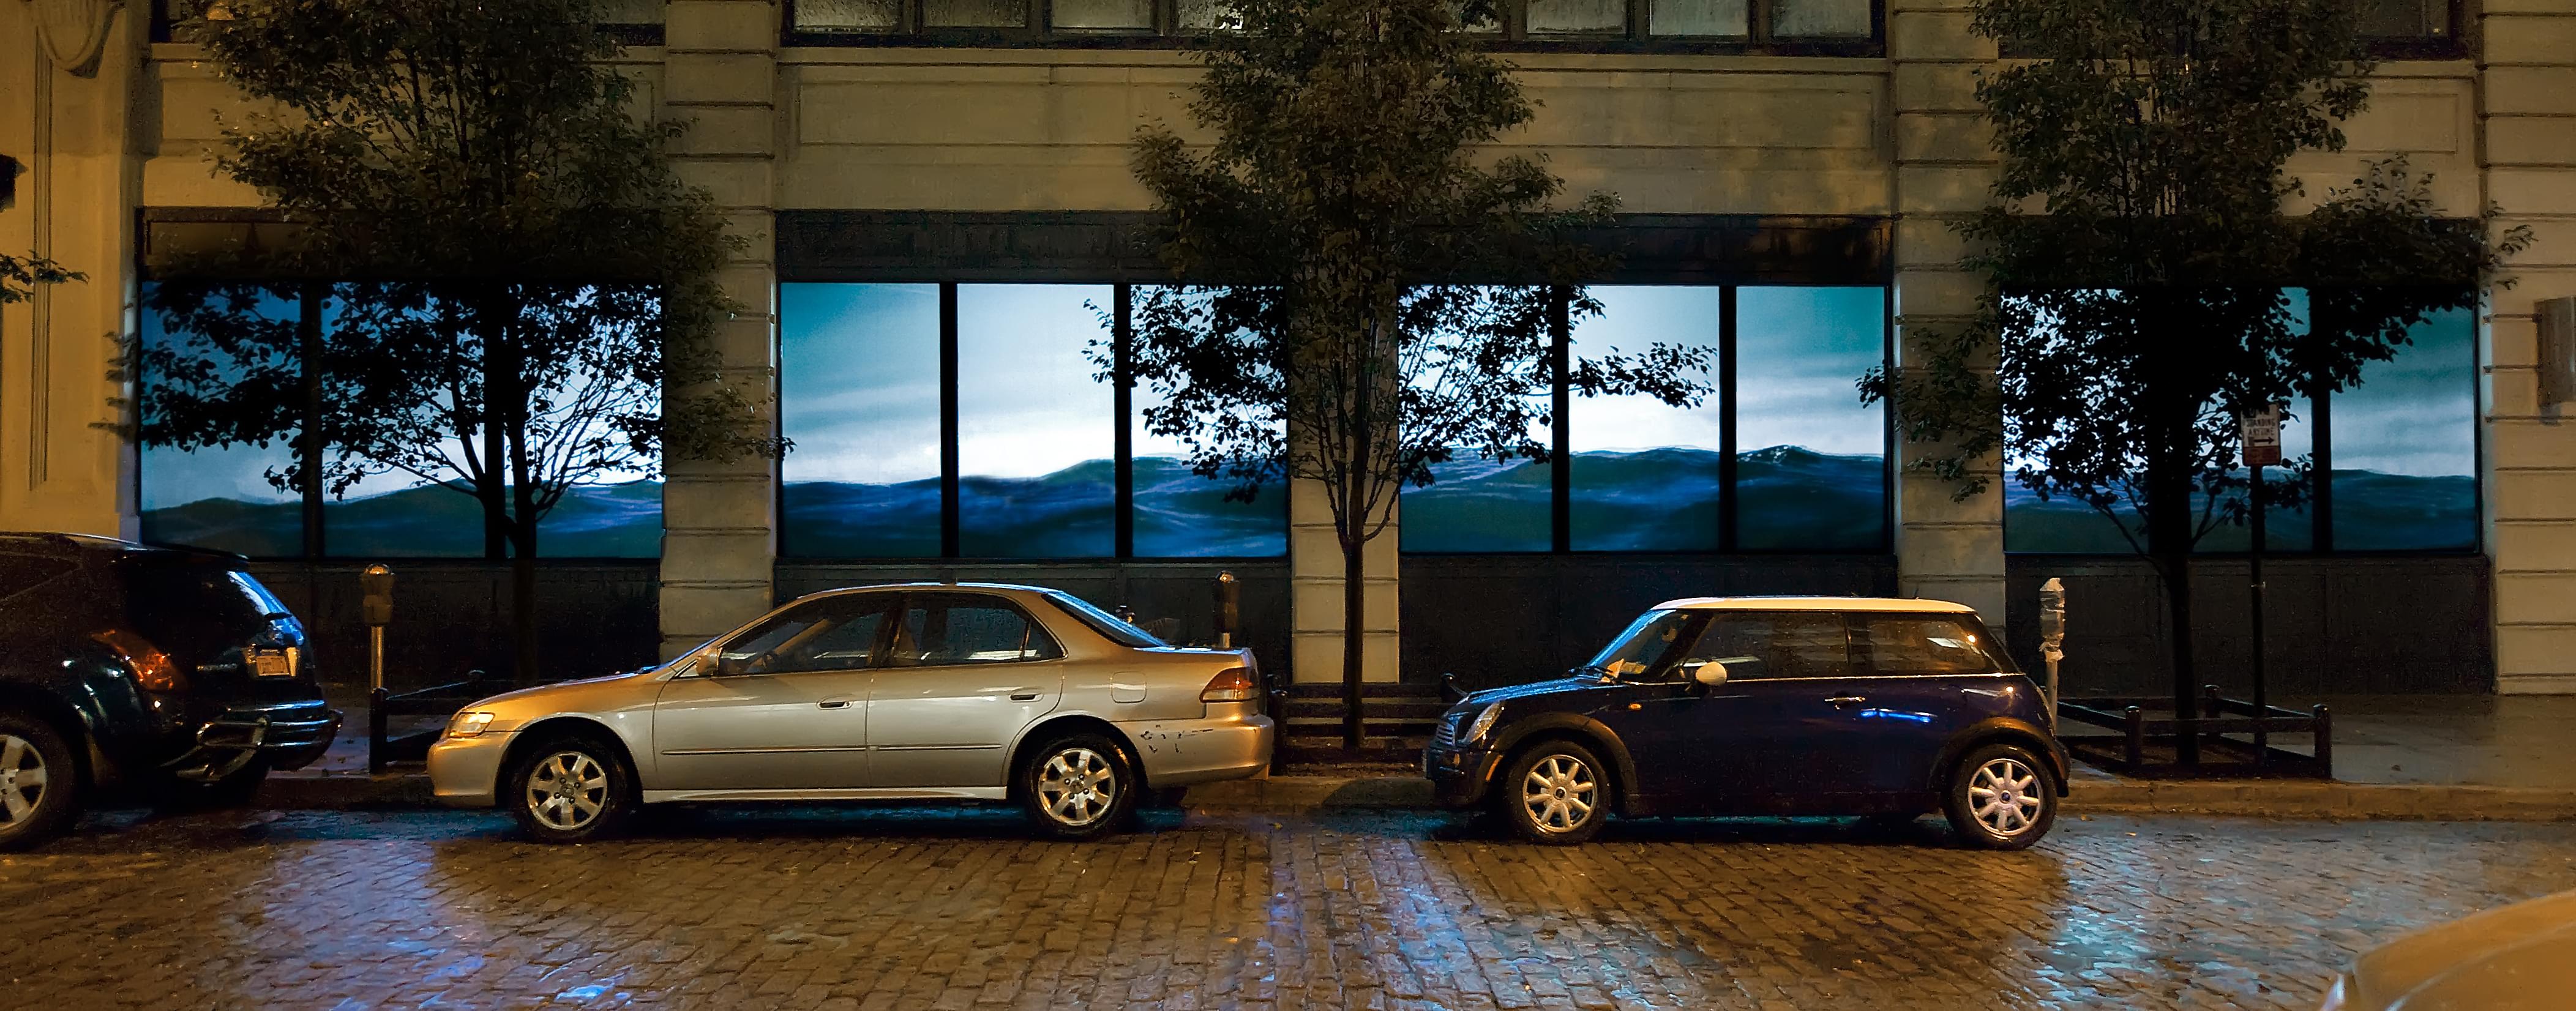 Nighttime photograph showing a urban storefront showing a video of a contiguous body of water projected across 4 of its windows; lower half of the project is dark blue water, the upper half is light blue sky